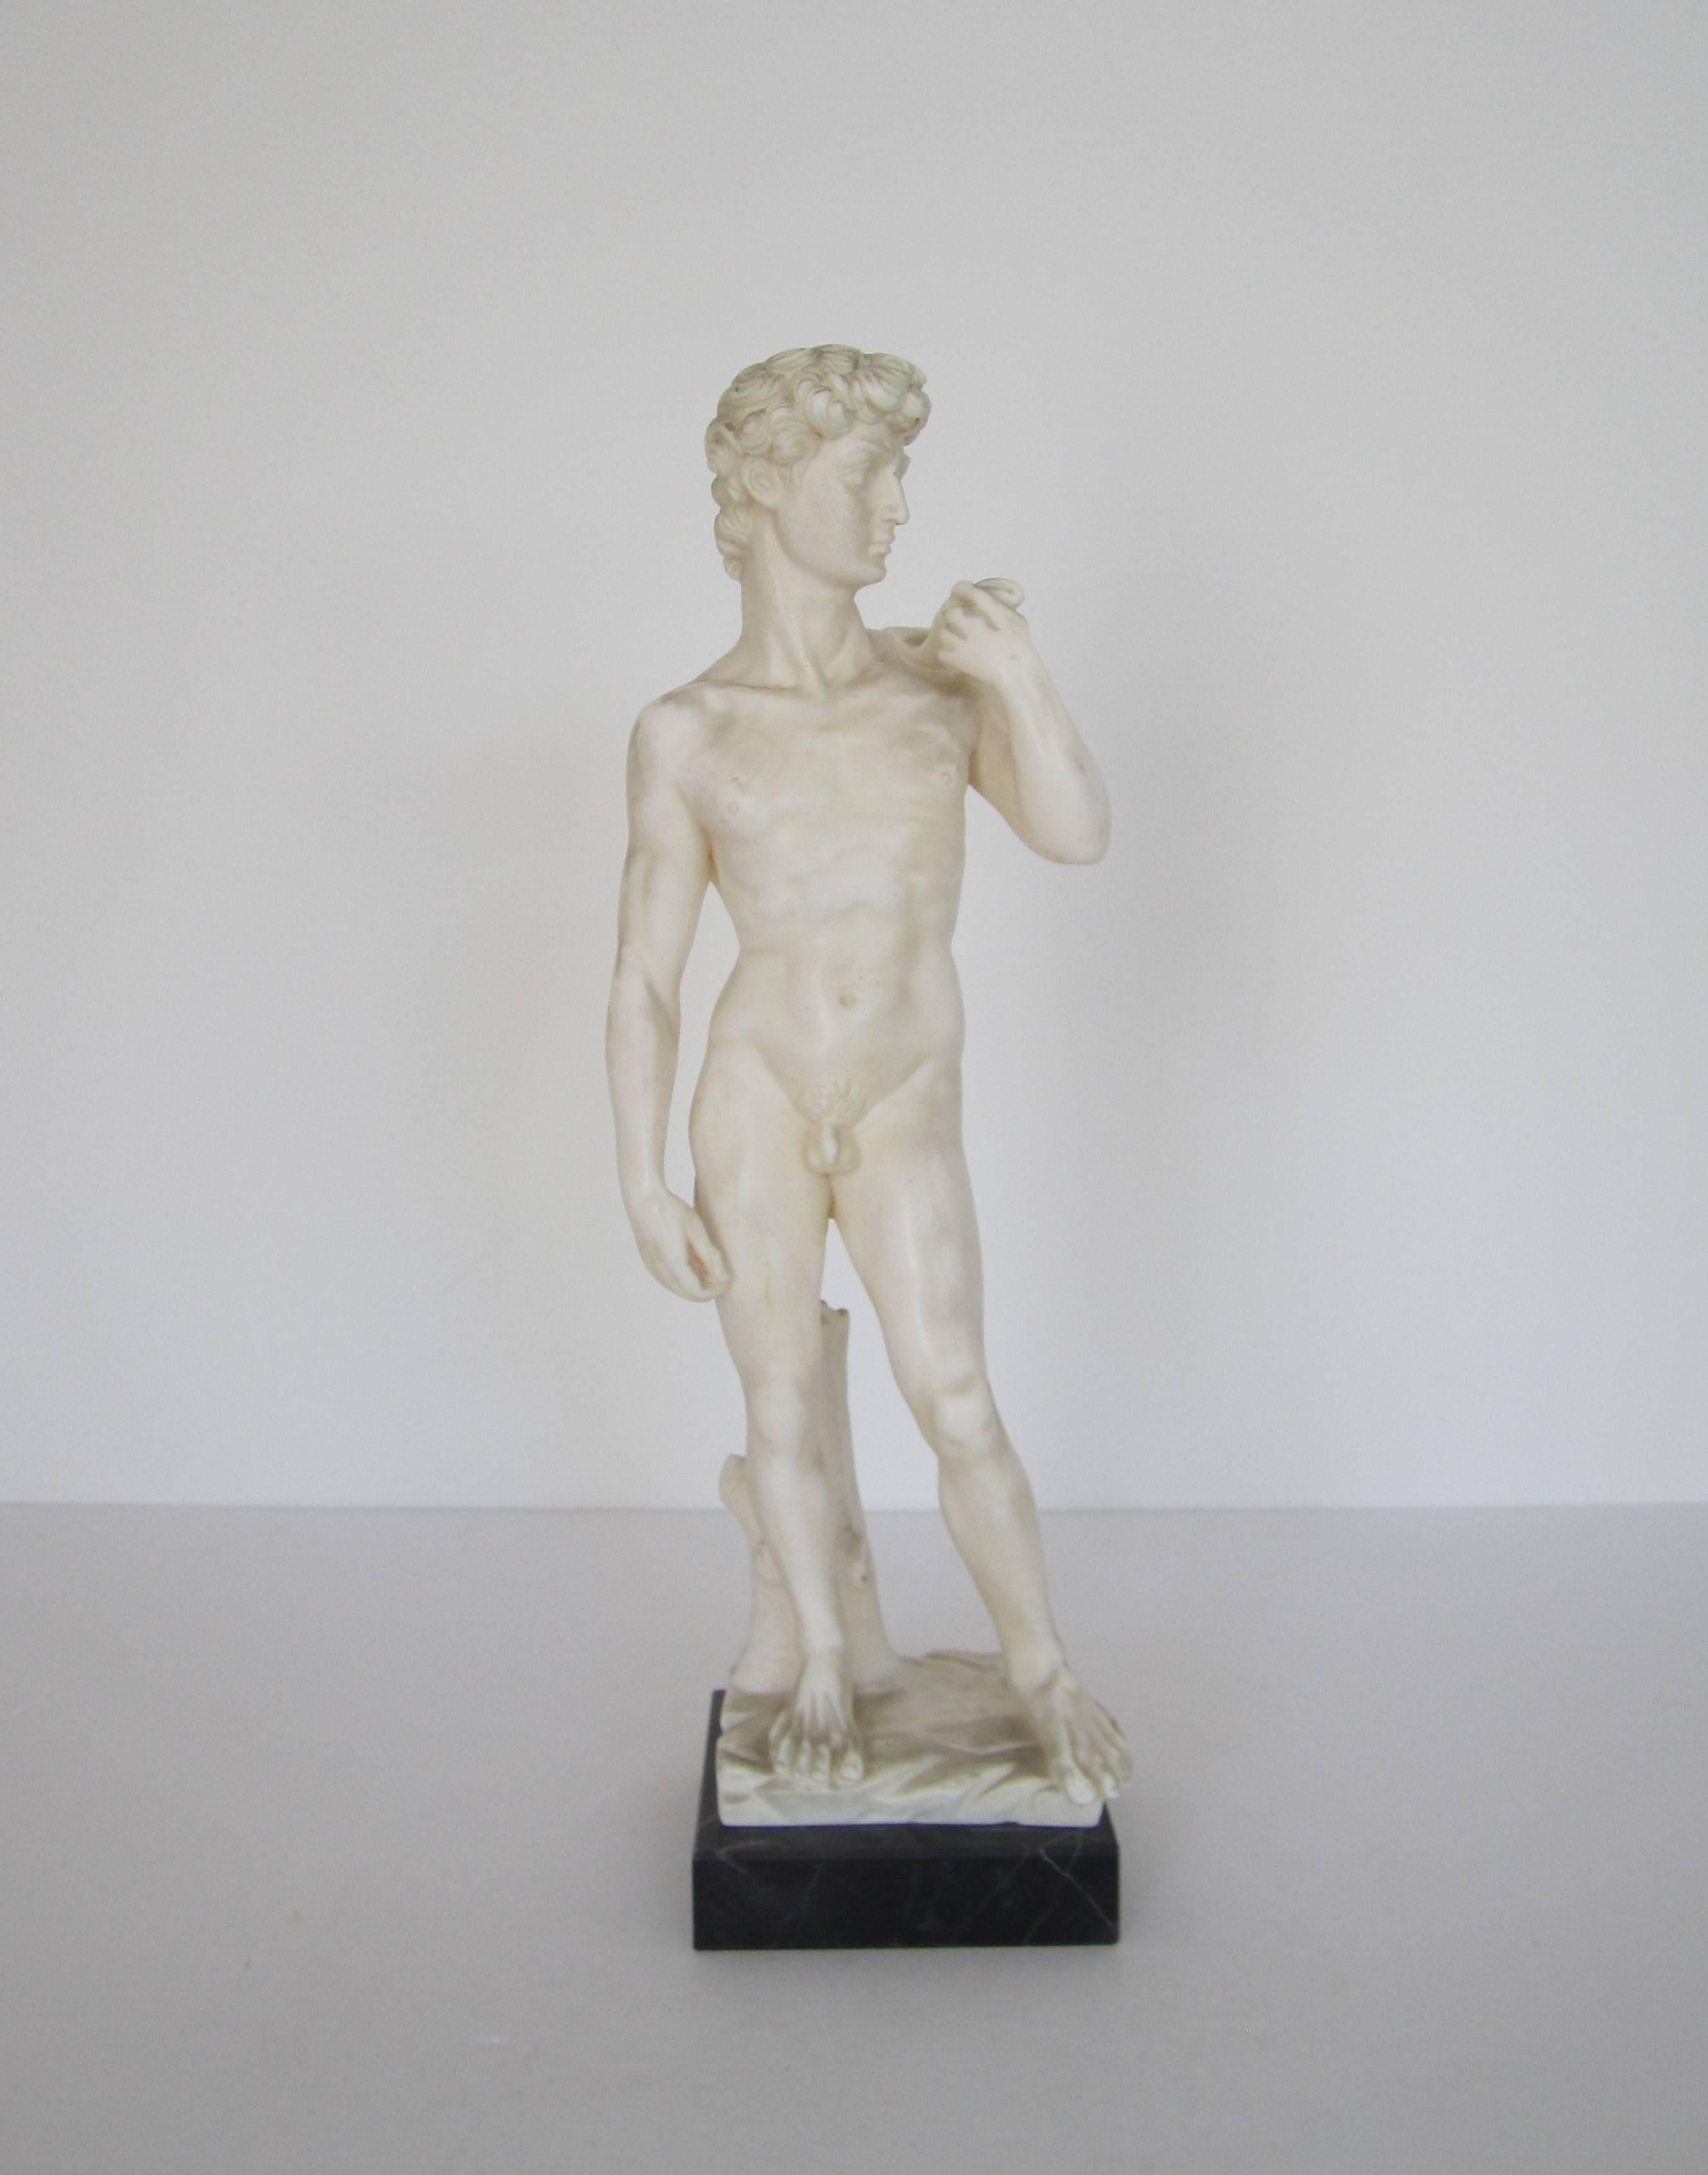 A Mid-20th century classic Italian Roman statue of the 'David' on a black marble base by sculptor G. Ruggeri, Italy. White resin statue is on a black marble base with tan veins. With maker's mark's and marked 'Made in Italy' as show in images #9 and